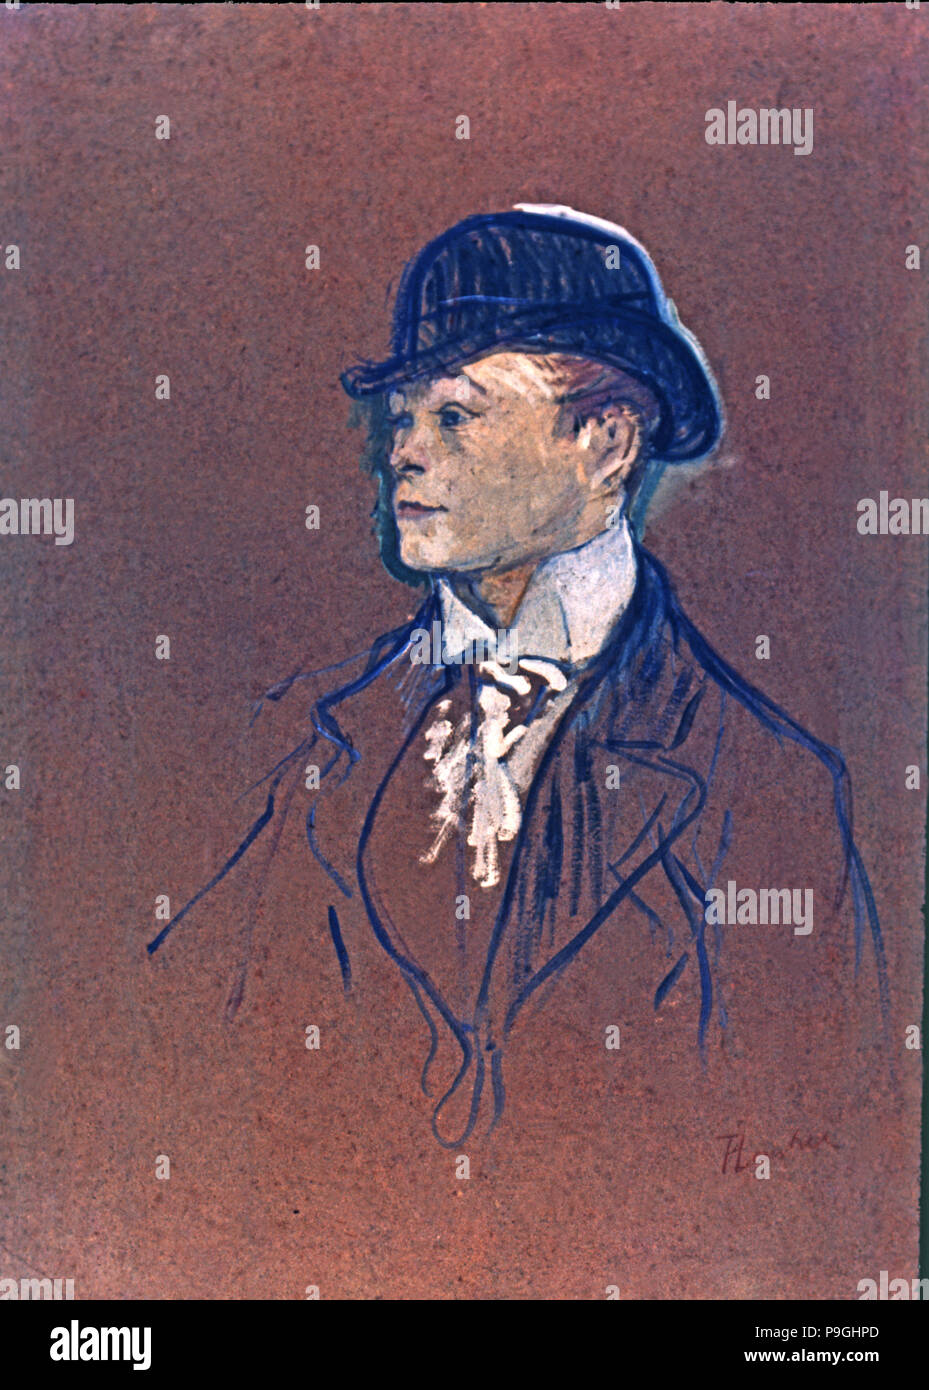 'Head of a racing groom', by Henri de Toulouse-Lautrec. Stock Photo